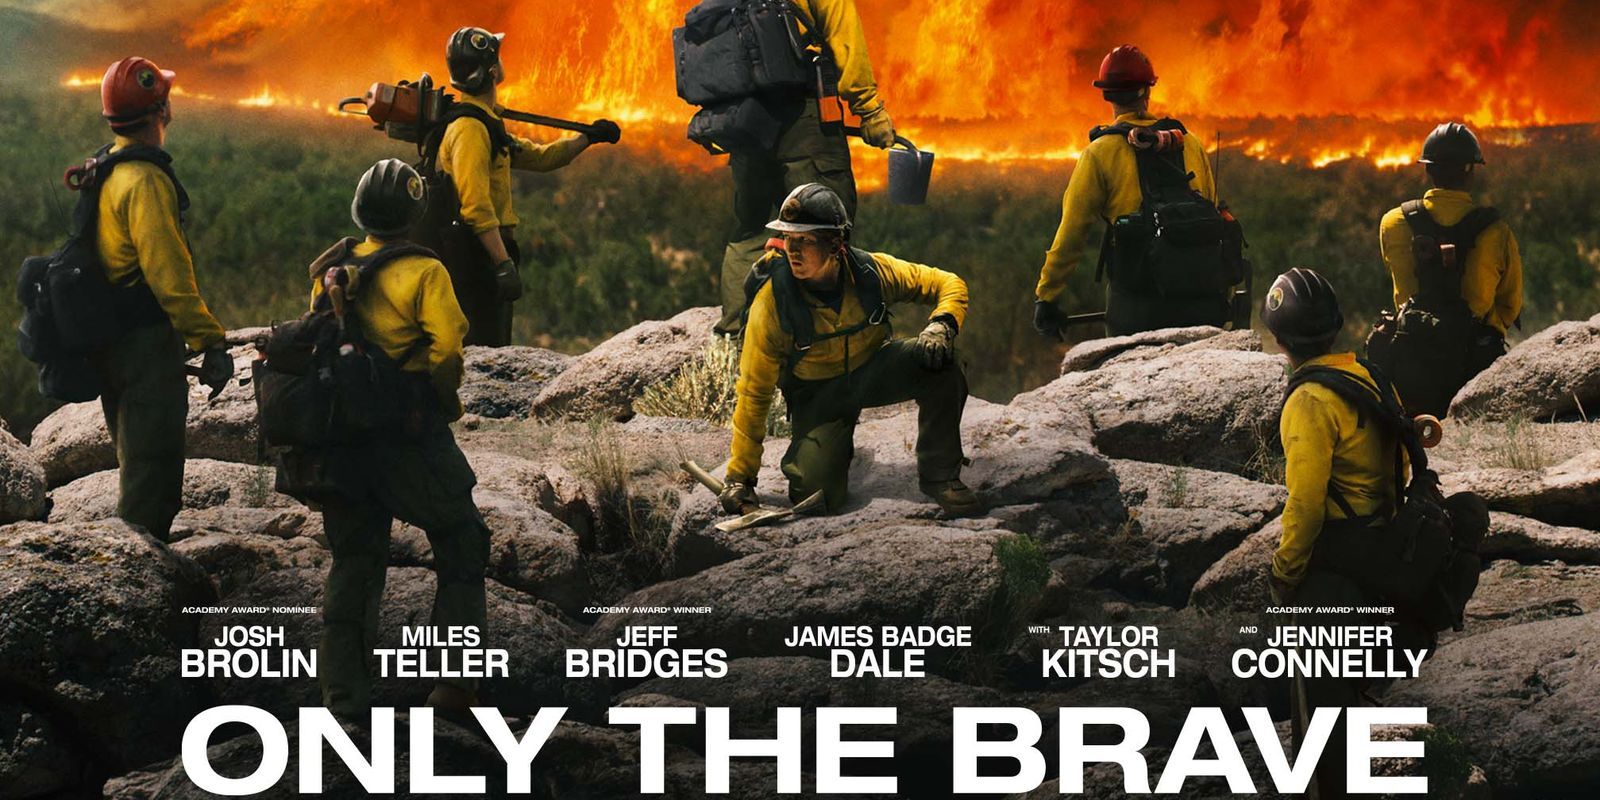 Only The Brave (2017): Based on the true story of the Granite Mountain Hotshots, a group of elite firefighters risk everything to protect a town from a historic wildfire.